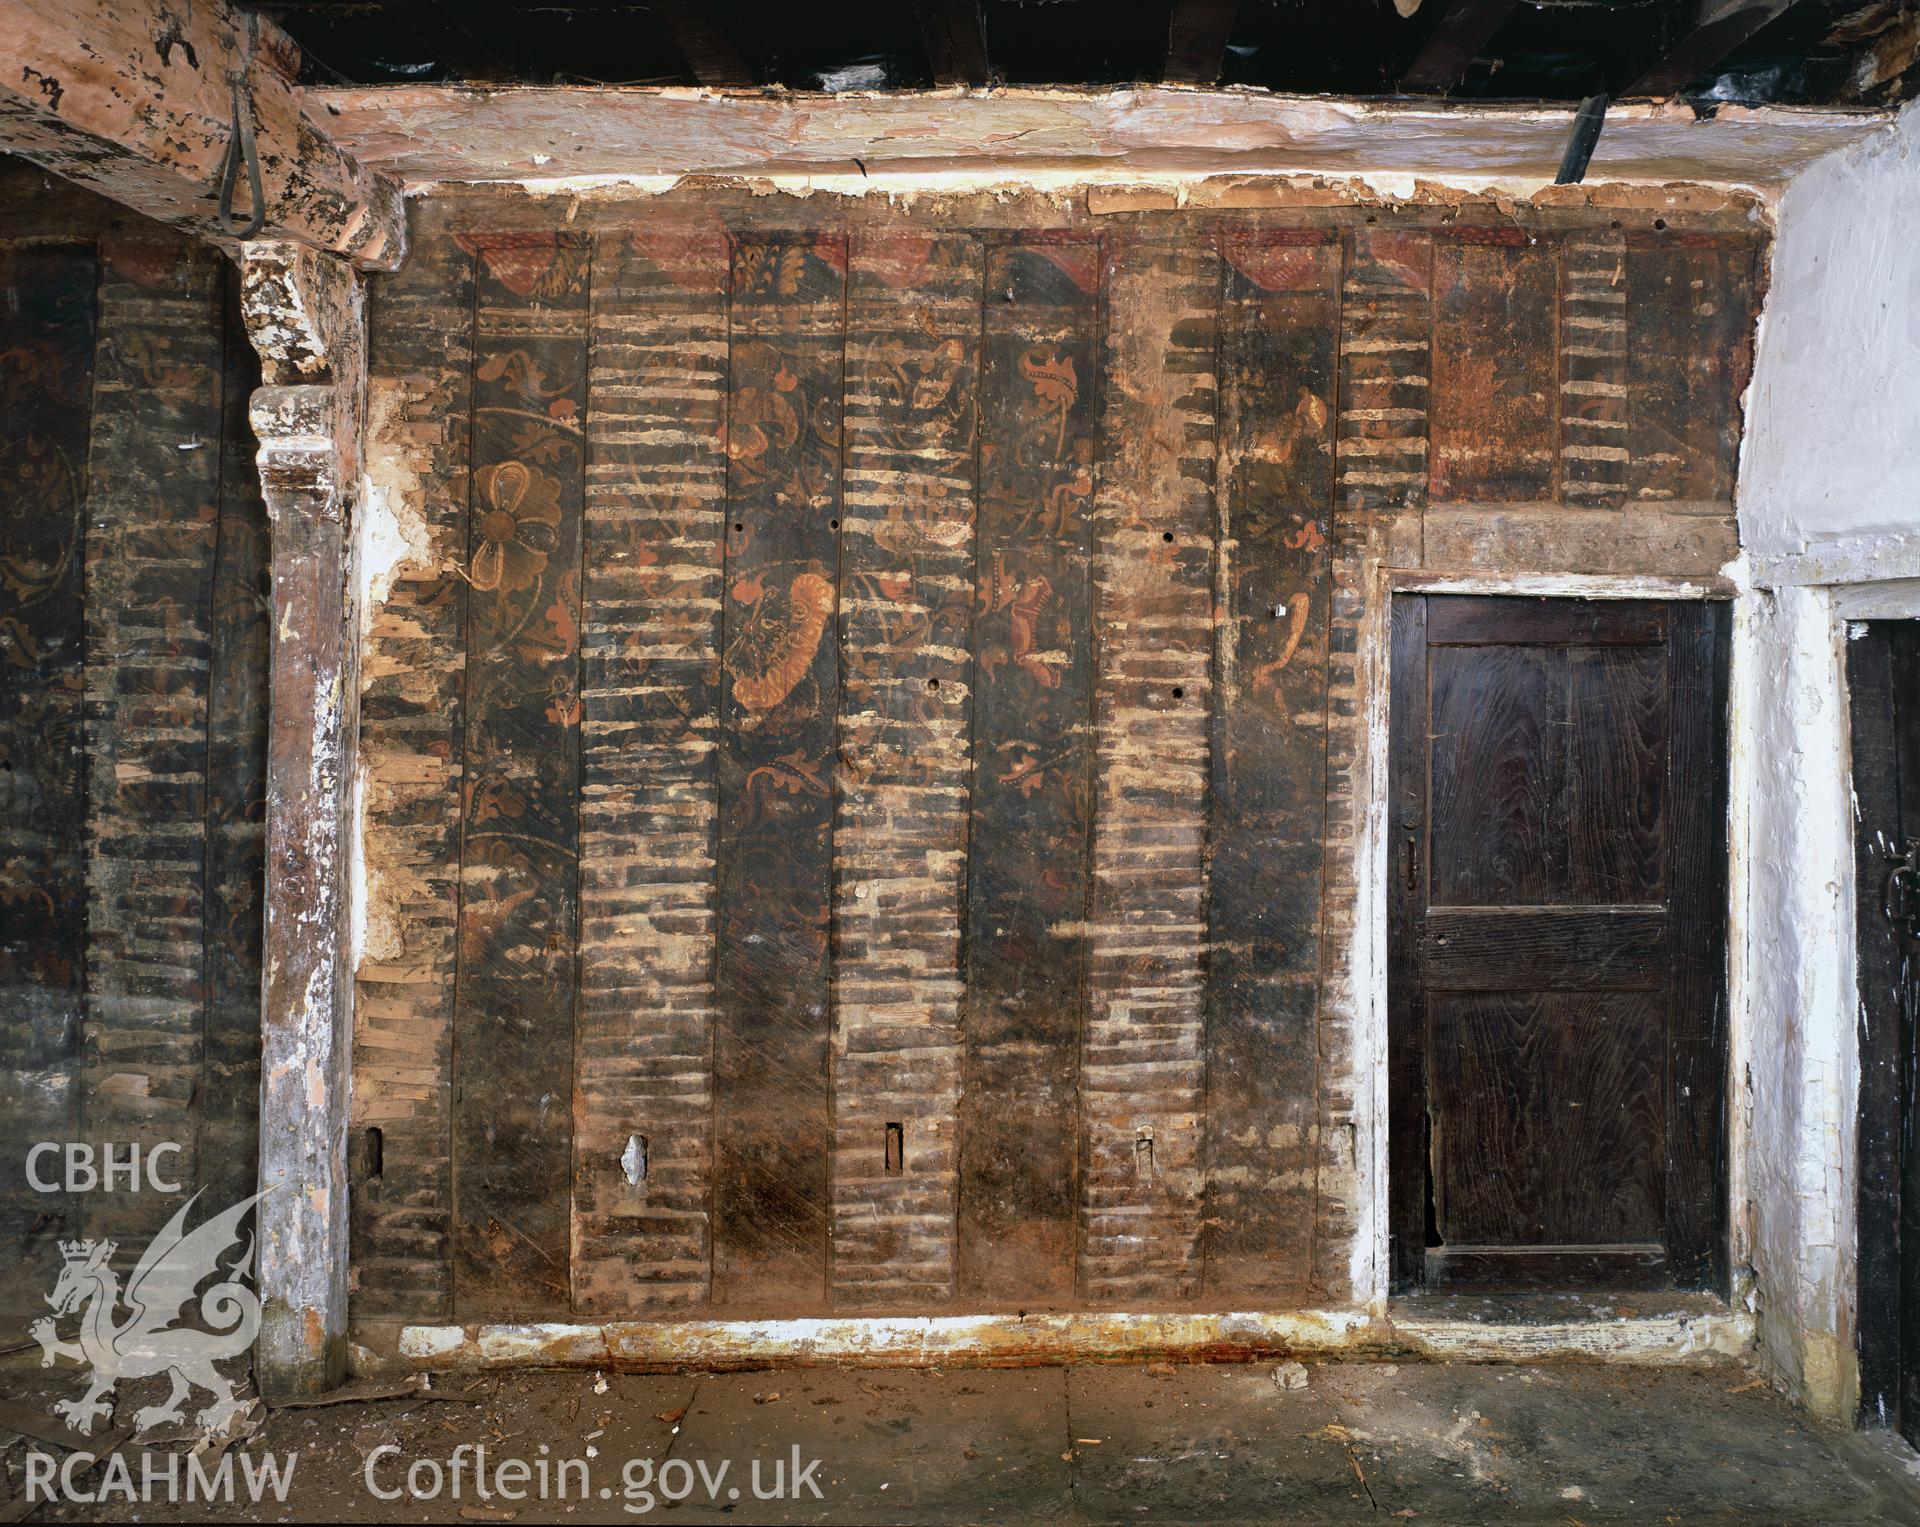 RCAHMW colour transparency showing screen decoration at Ciliau, Painscastle.